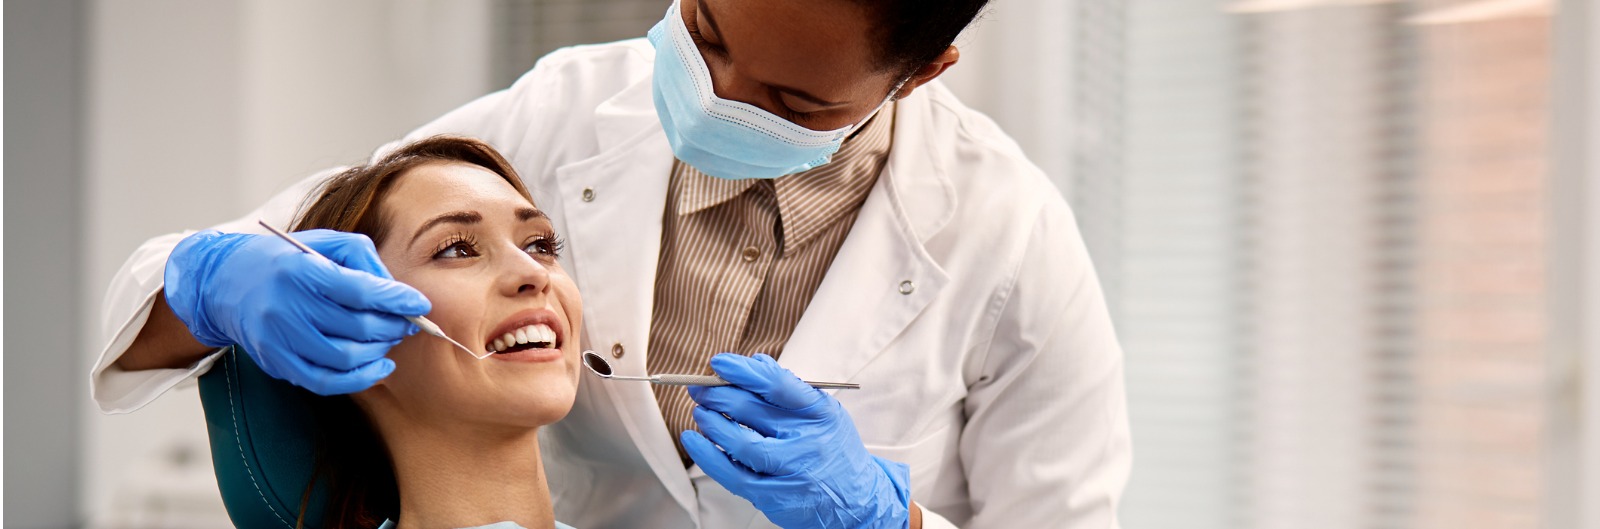 smiling-woman-getting-her-teeth-checked-during-dental-appointment-1600x529.jpg